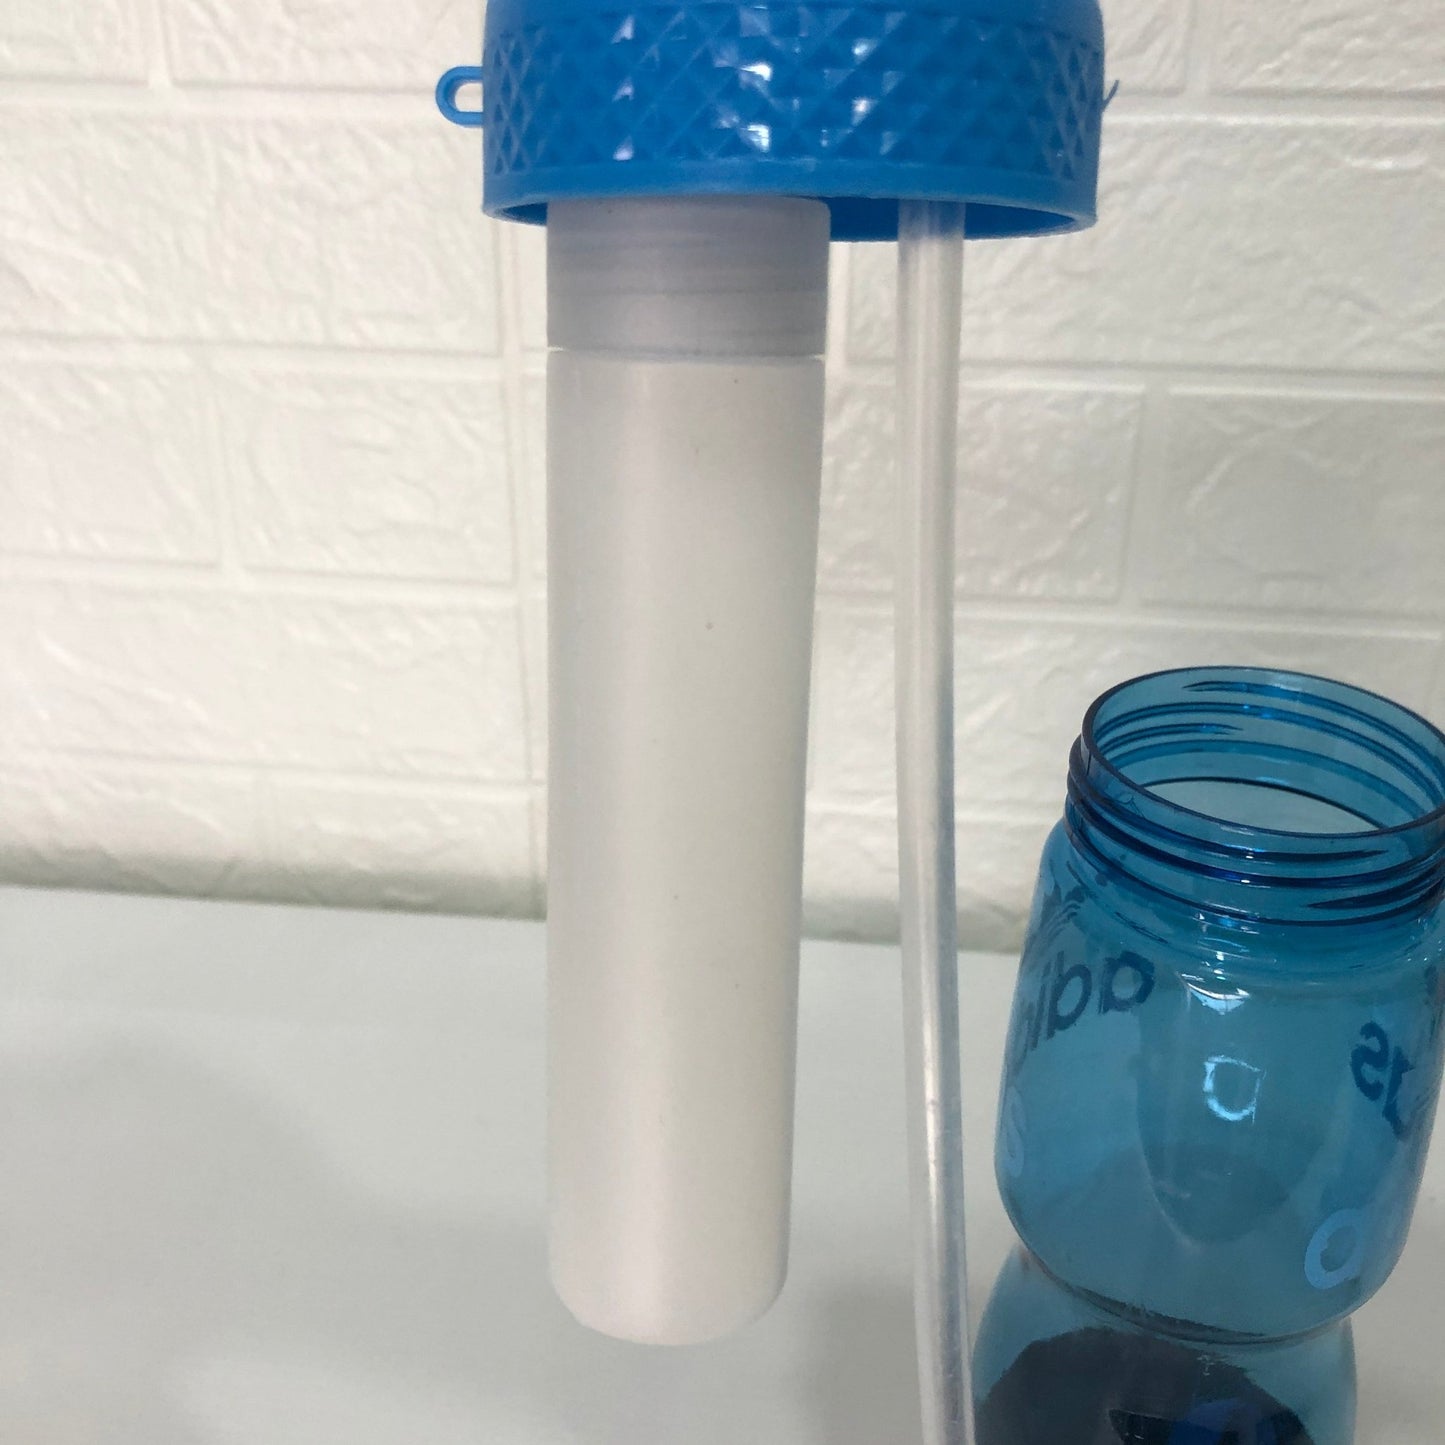 Steel Water Bottle With Ice Container - DS Traders